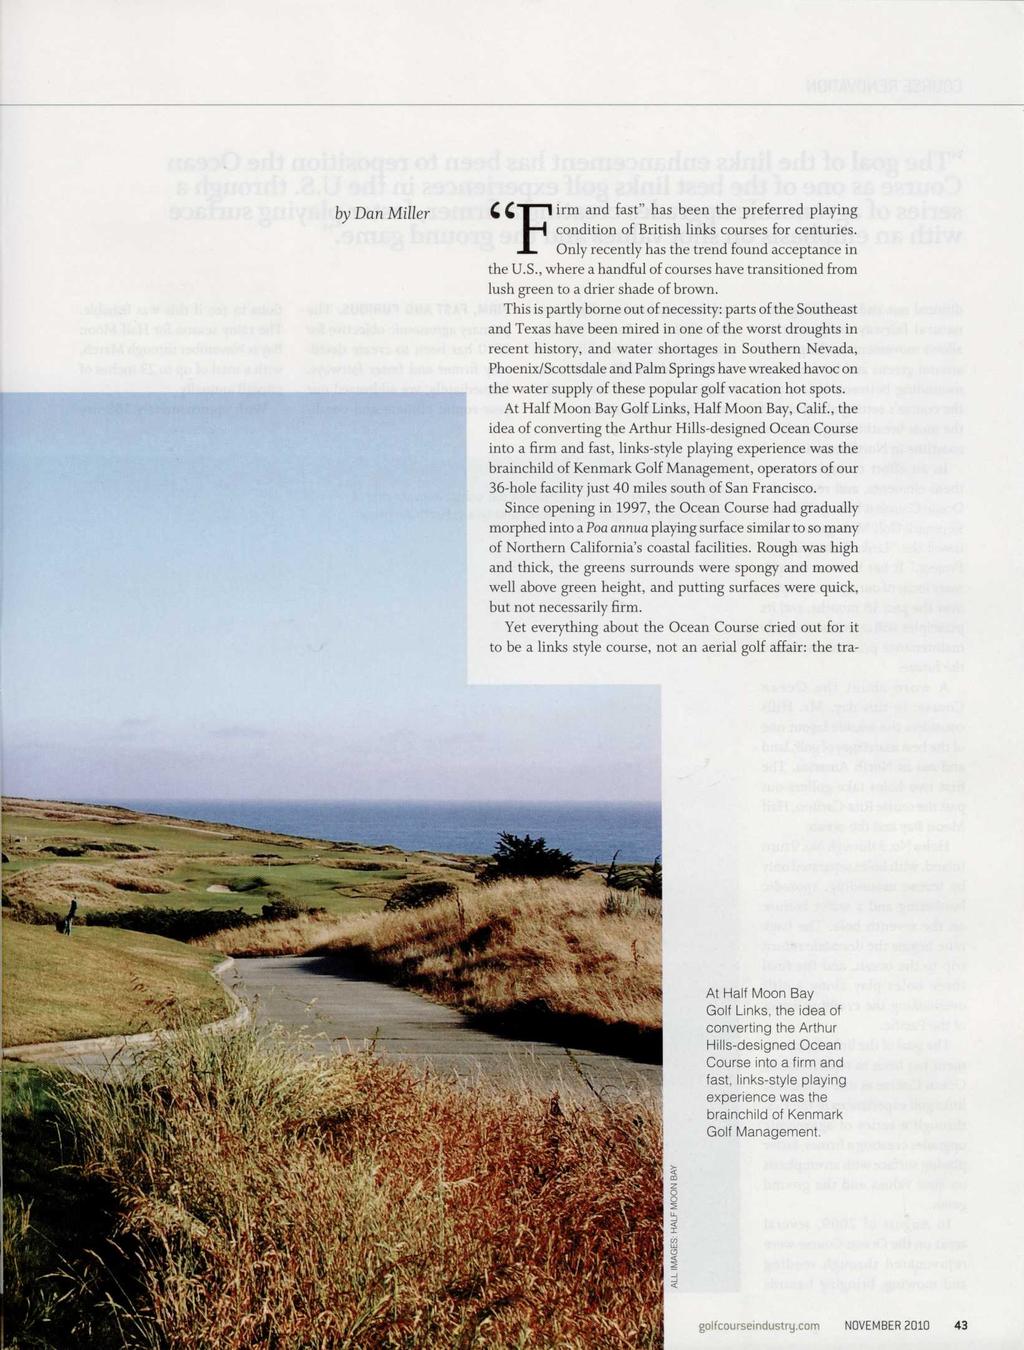 Q a i irm and fast" has been the preferred playing rh condition of British links courses for centuries. -L Only recently has the trend found acceptance in the U.S.